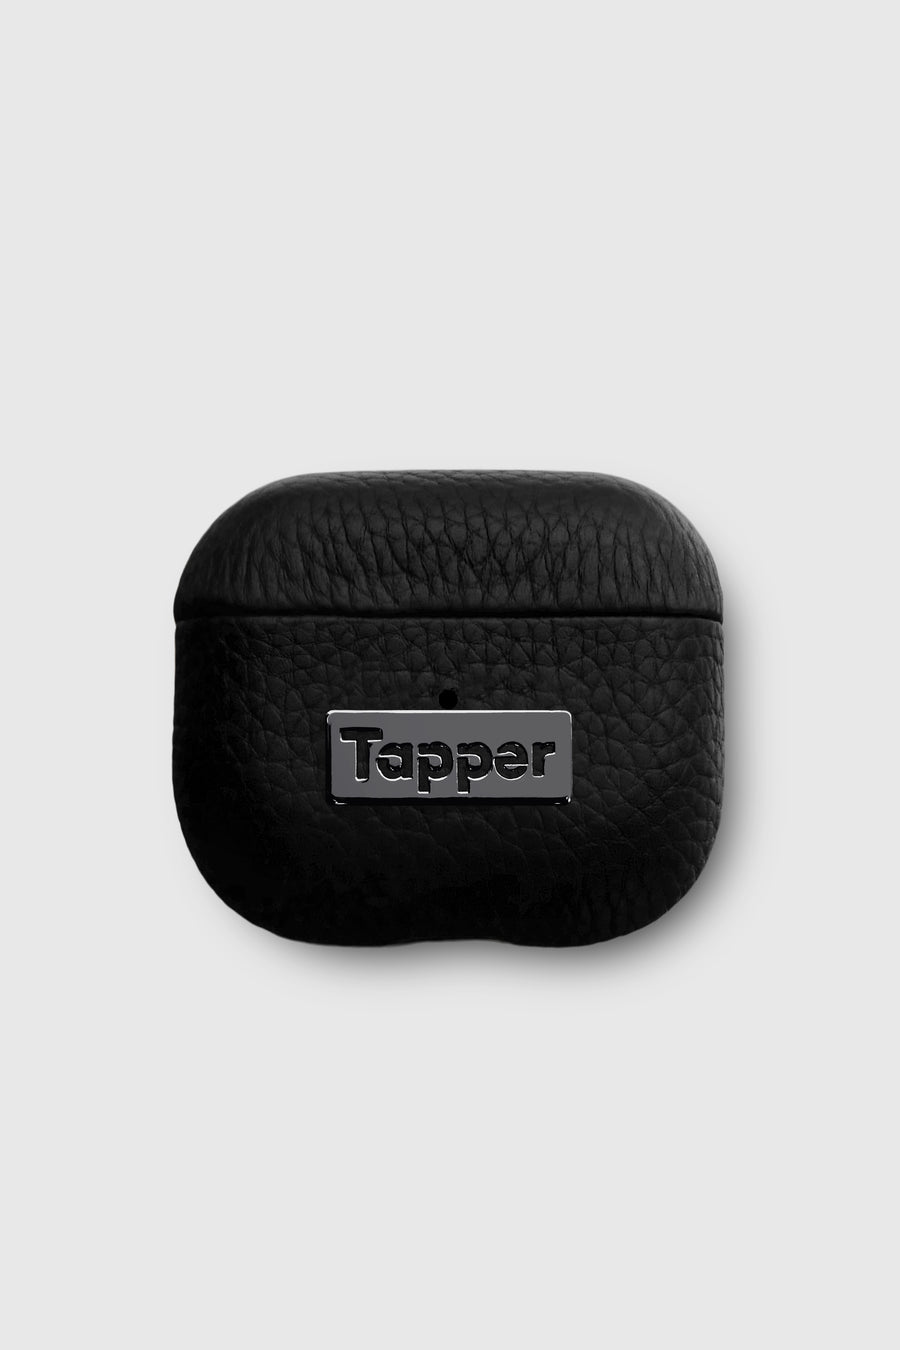 Tapper's luxurious black genuine lamb leather AirPods case protects and elevates the look of your AirPods. The luxurious, protective case for AirPods with a metal logo plate in hematite black plating steps up your AirPods game. The next must-have high end protective Apple AirPods accessory in real leather and precious metals. Compatible with AirPods (3rd generation). Designed in Sweden by Tapper. Free Express Shipping at gettapper.com